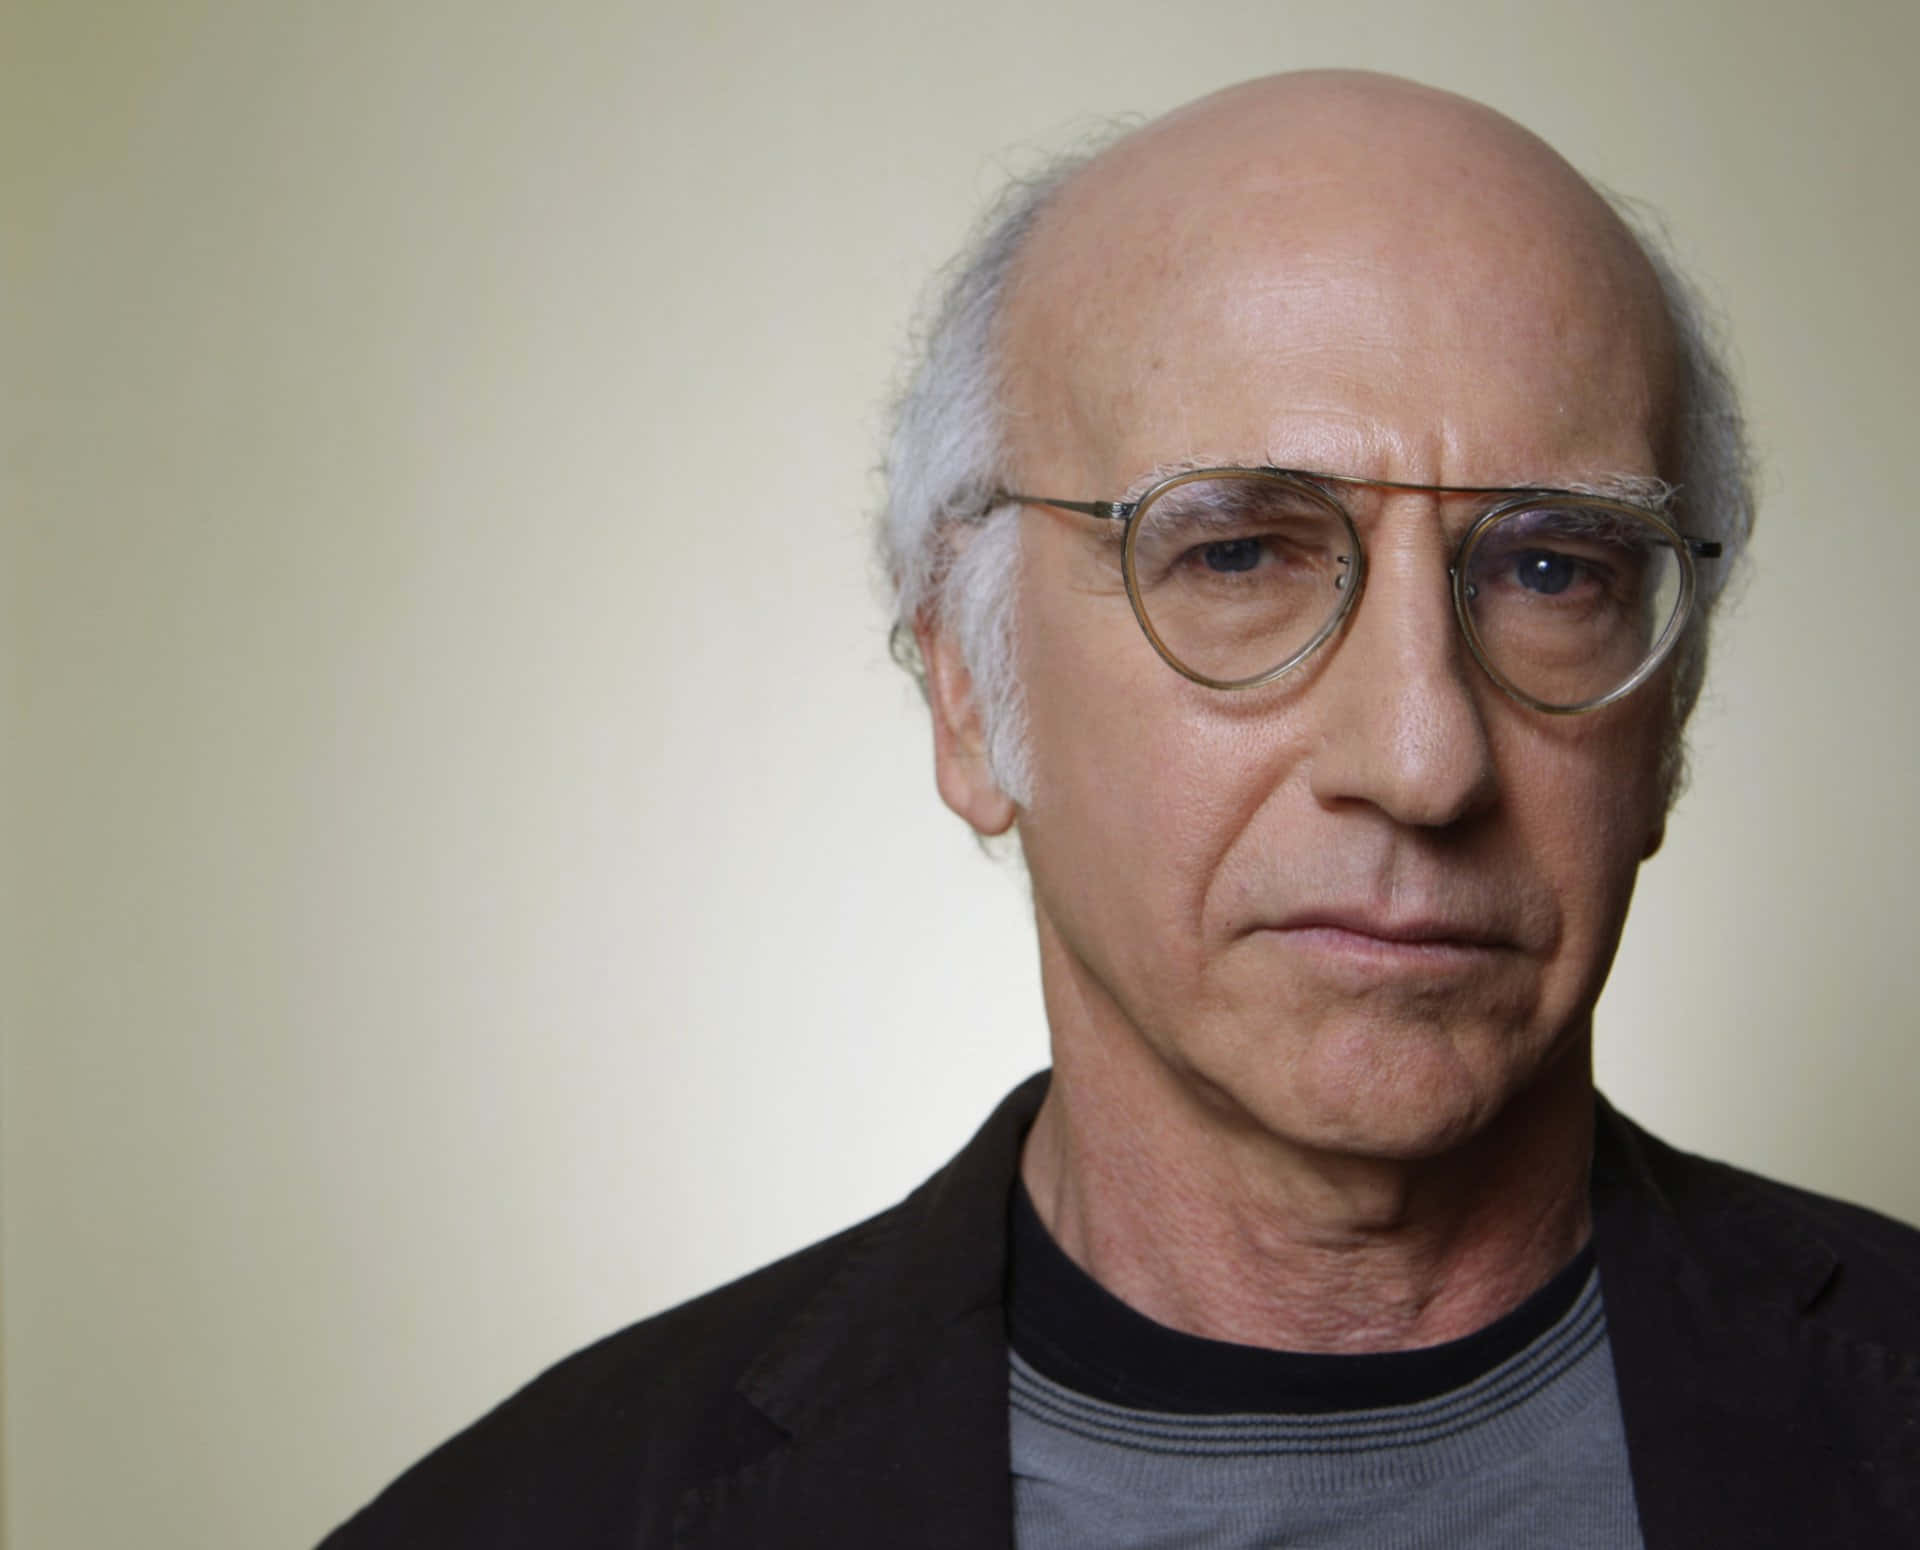 Larry David in his classic role as creator, writer and star of the hit show 'Curb Your Enthusiasm' Wallpaper